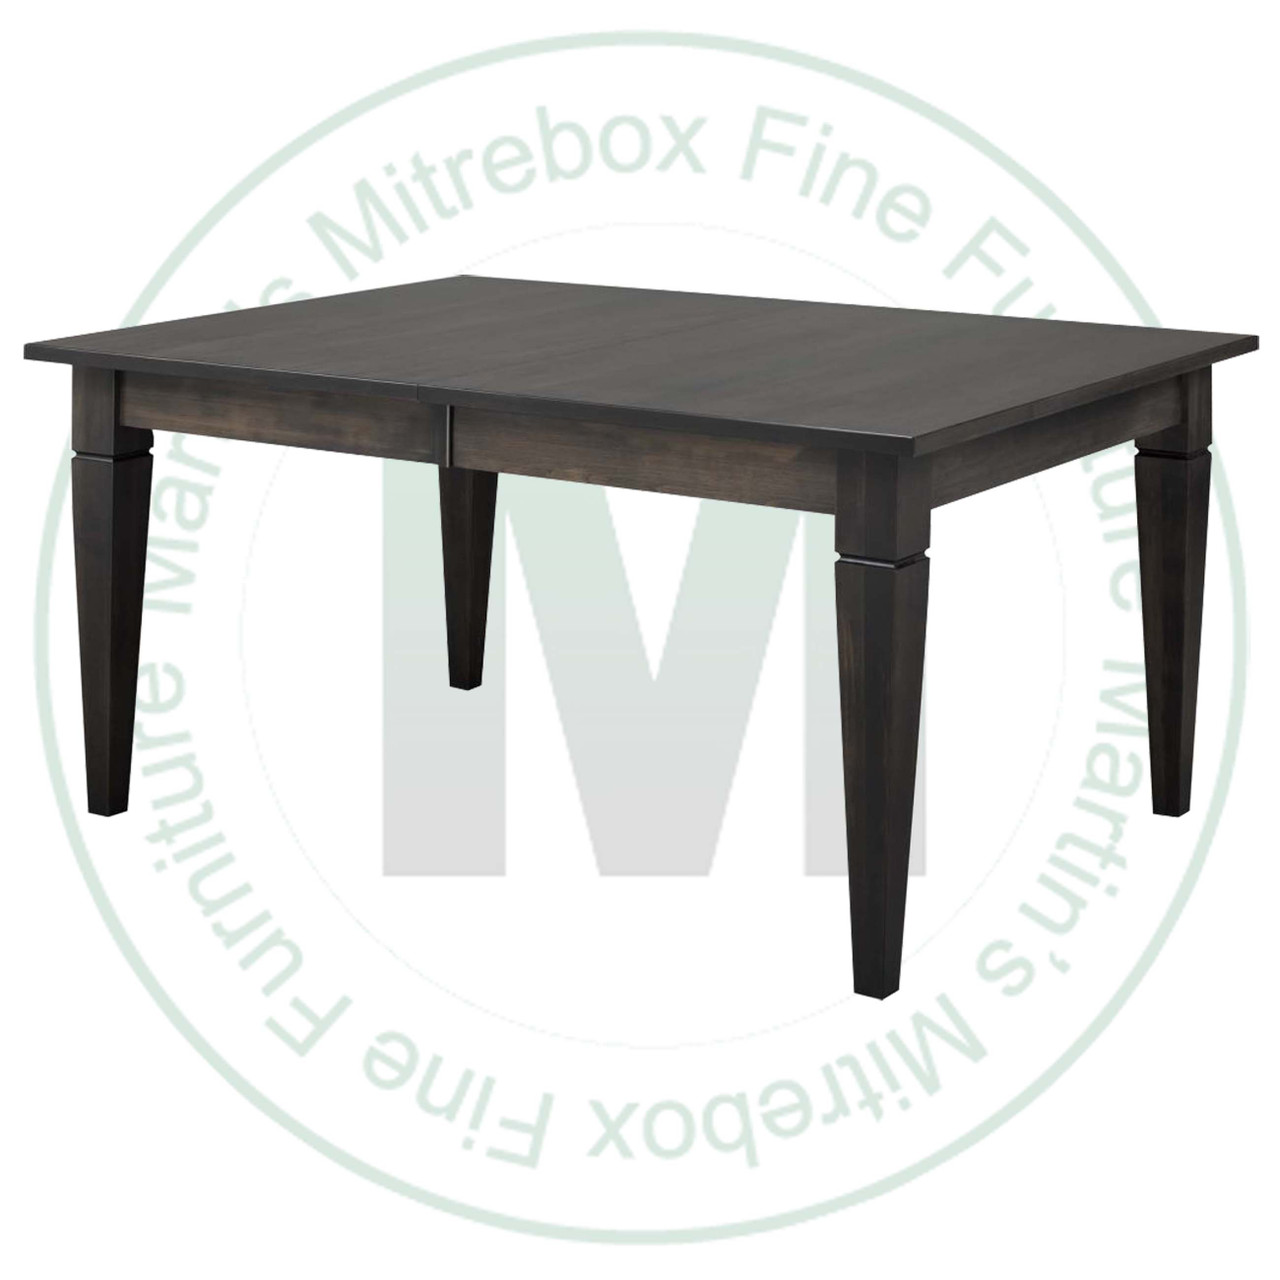 Wormy Maple Reesor Solid Top Harvest Table 42''D x 60''W x 30''H Table Has 1 3/4'' Thick Top And 2 - 16'' Extensions